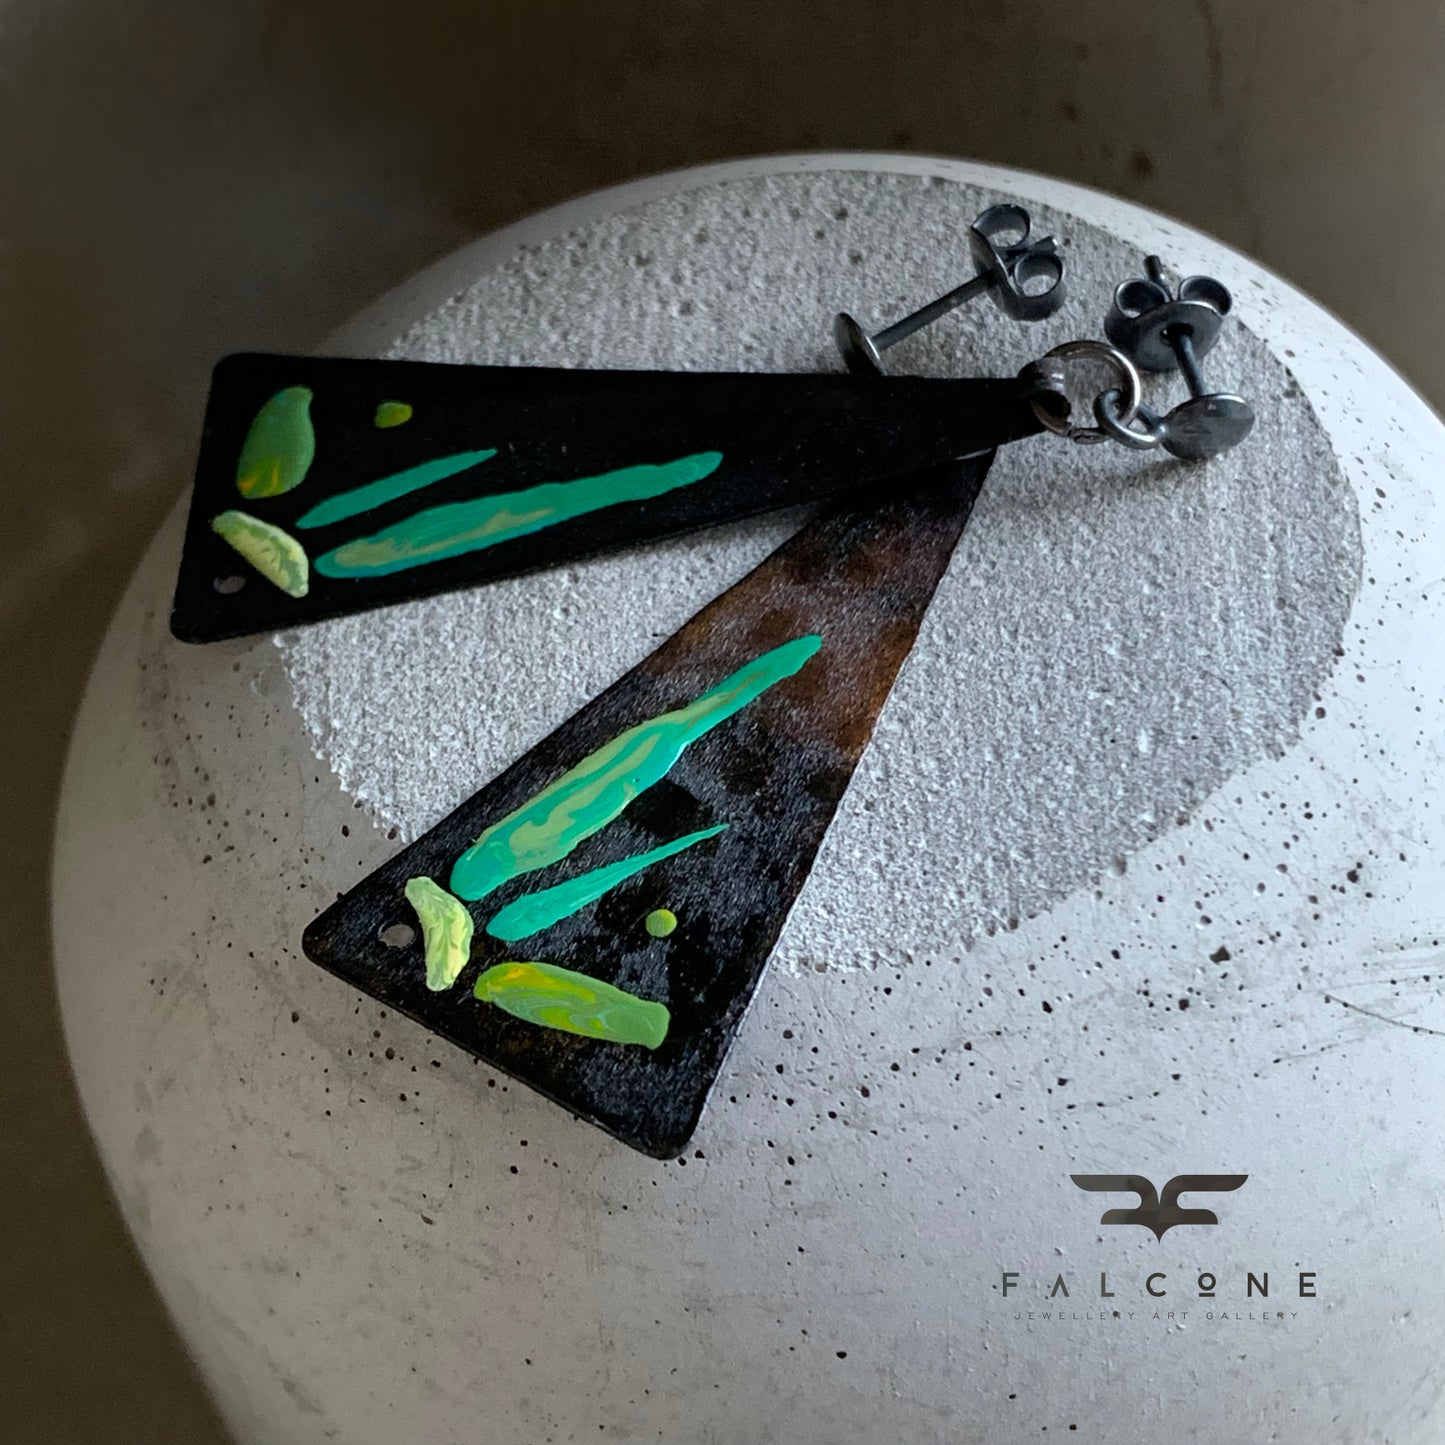 Copper and silver earrings with enamel 'Fish from Lake Tanganyika'